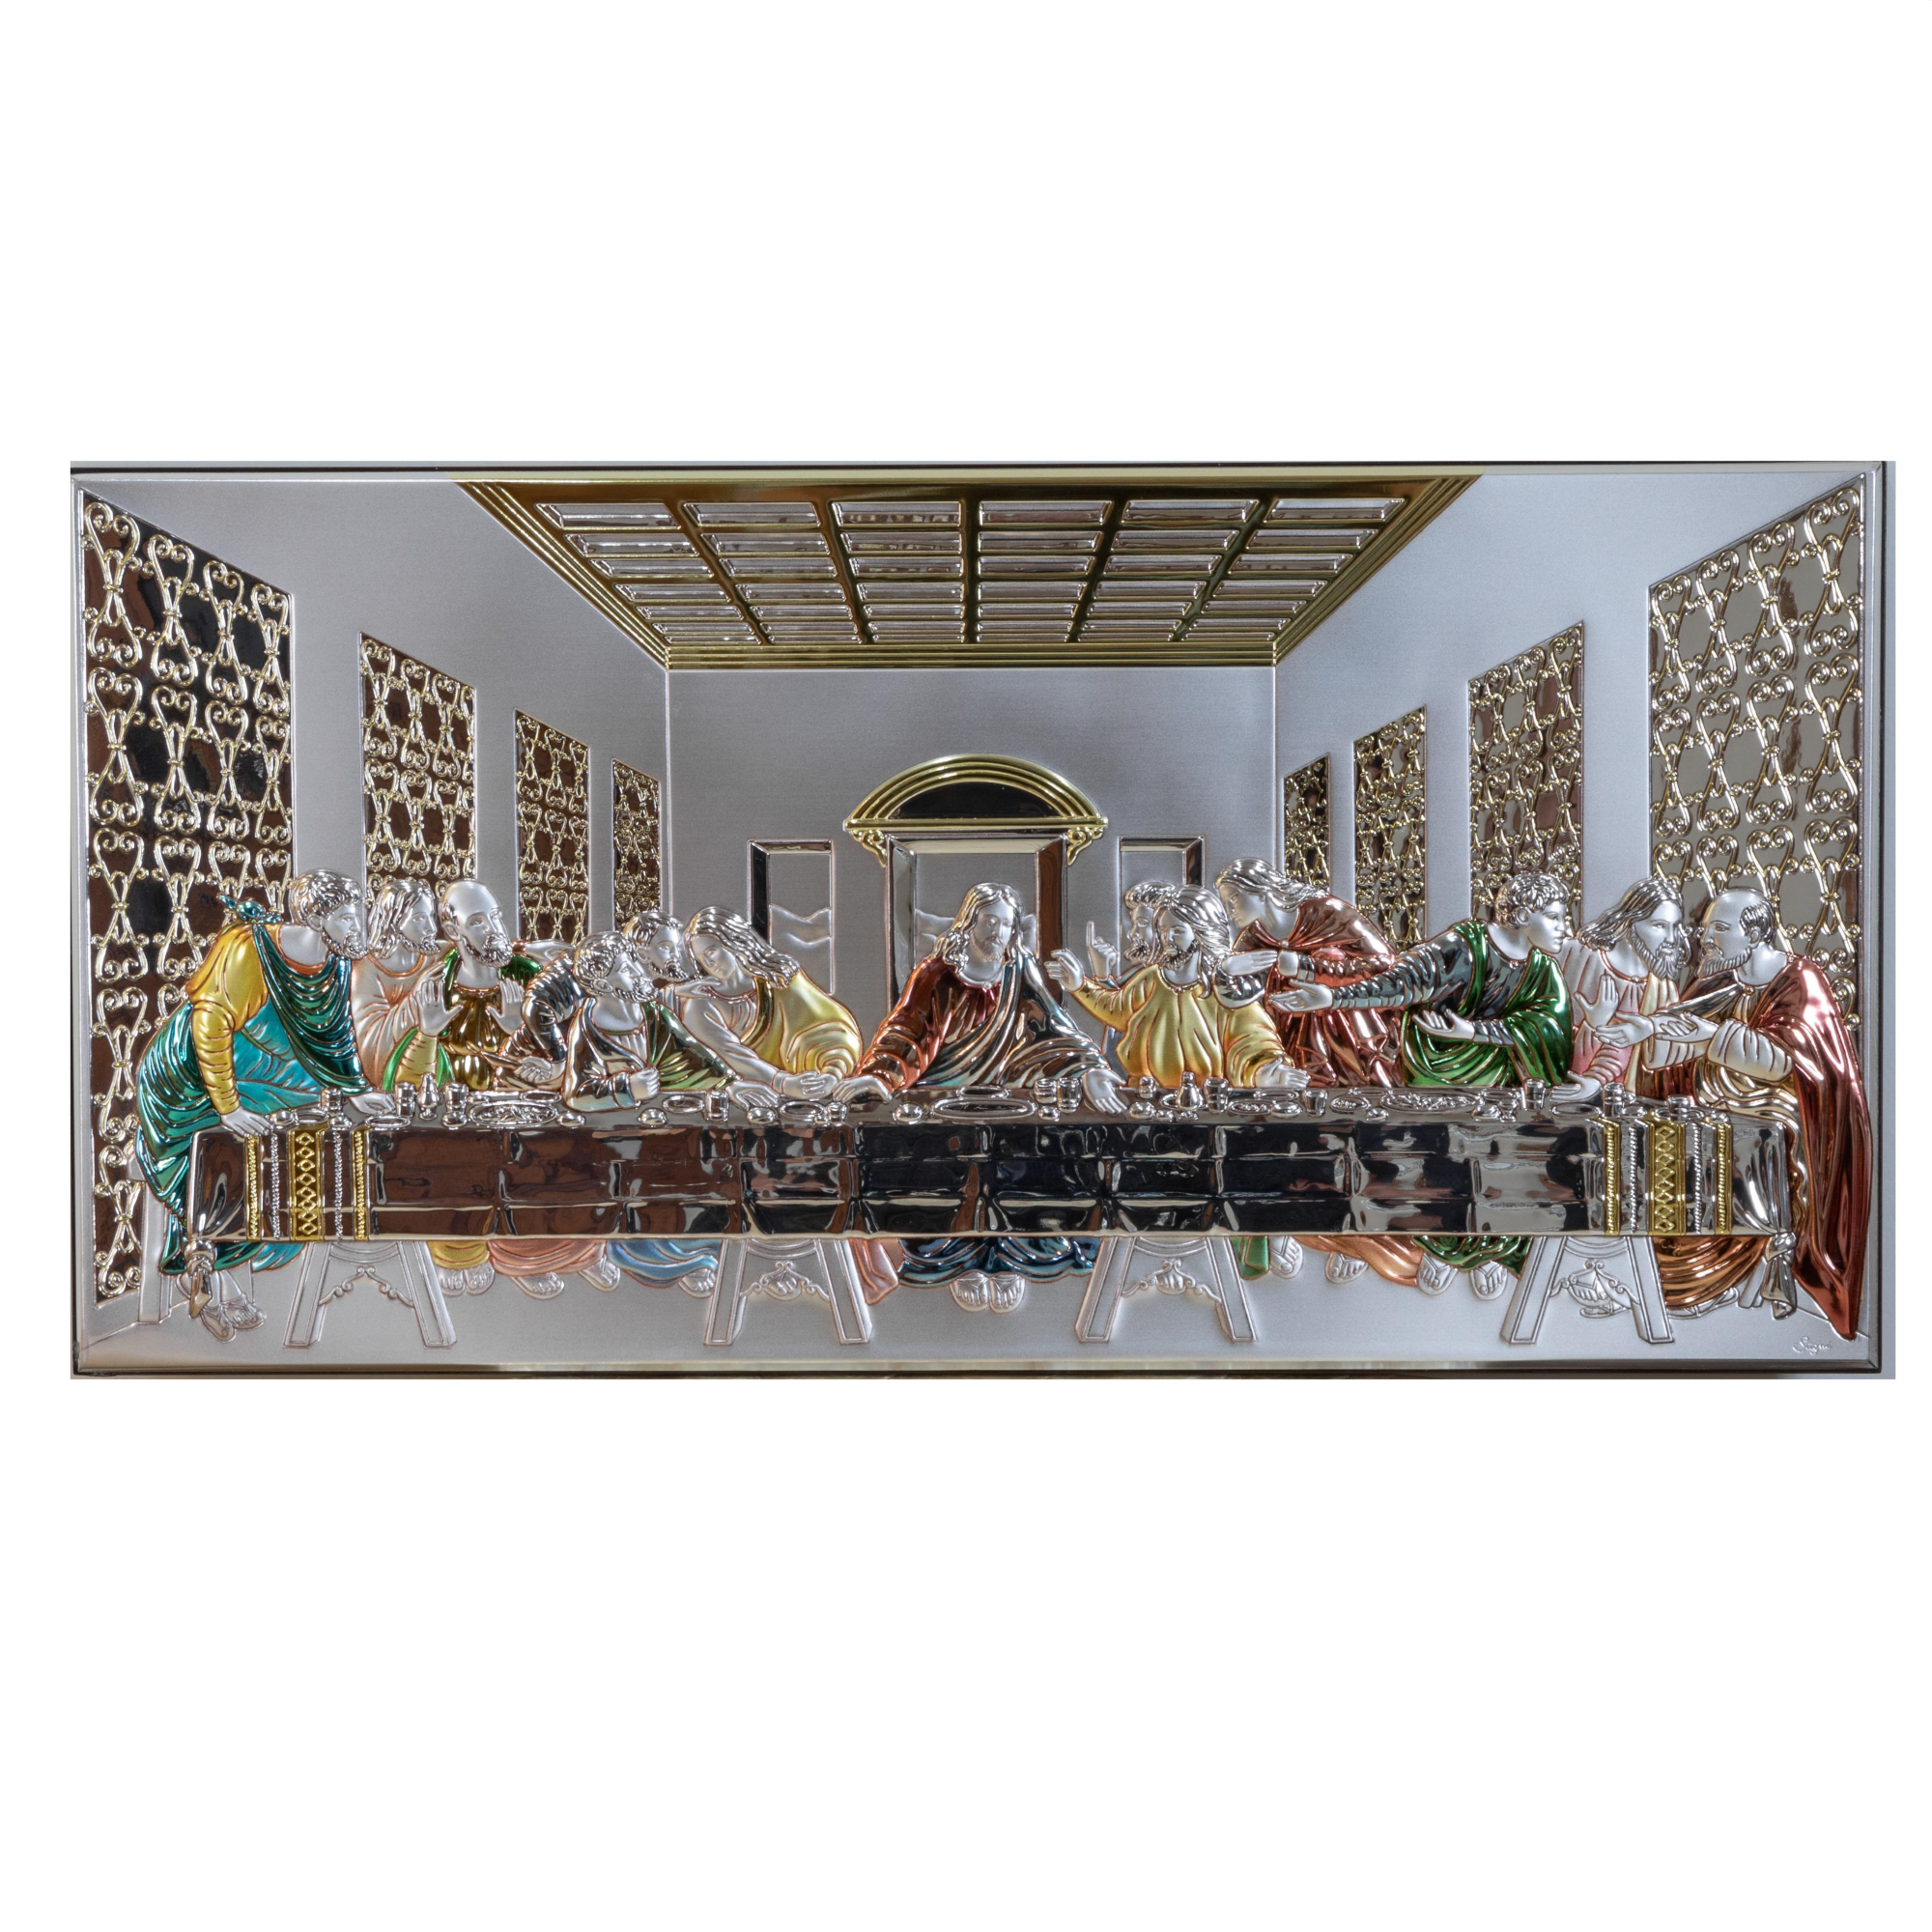 Icon of last supper, Silver plated, Colored, Size: 23.8" x 12"